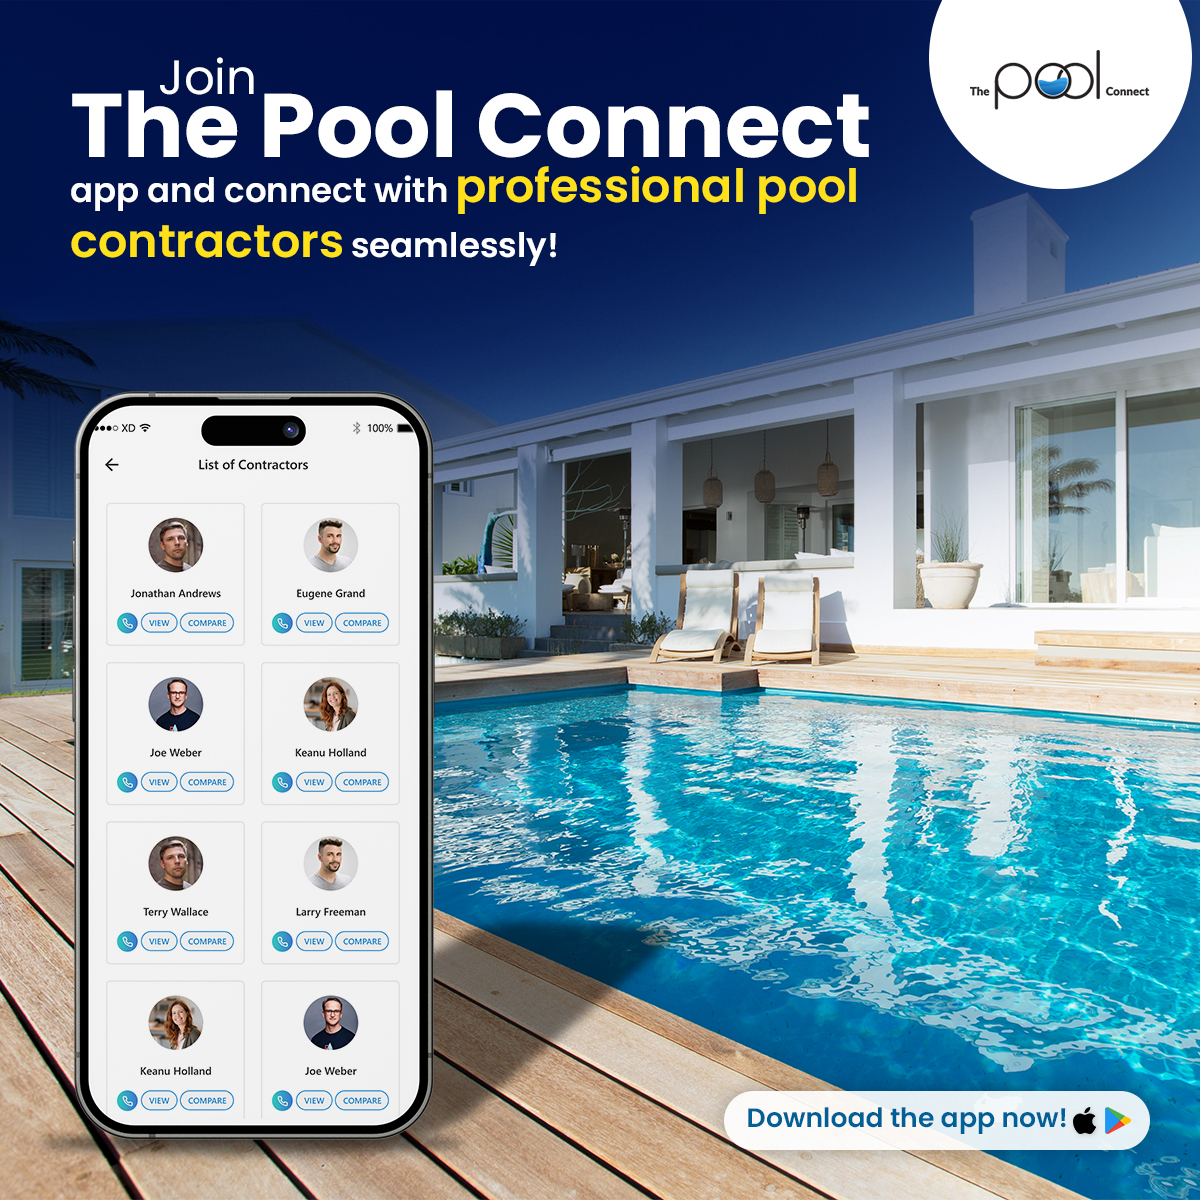 Make a splash this summer with The Pool Connect app!
Find top pool contractors and dive into your dream pool project.
Download now!

Visit: thepoolconnect.com

#poolcontractor #poolrenovation #poolwork #poolmaintenance #poolconstruction #poolsubcontractor #poolbuilder #pool